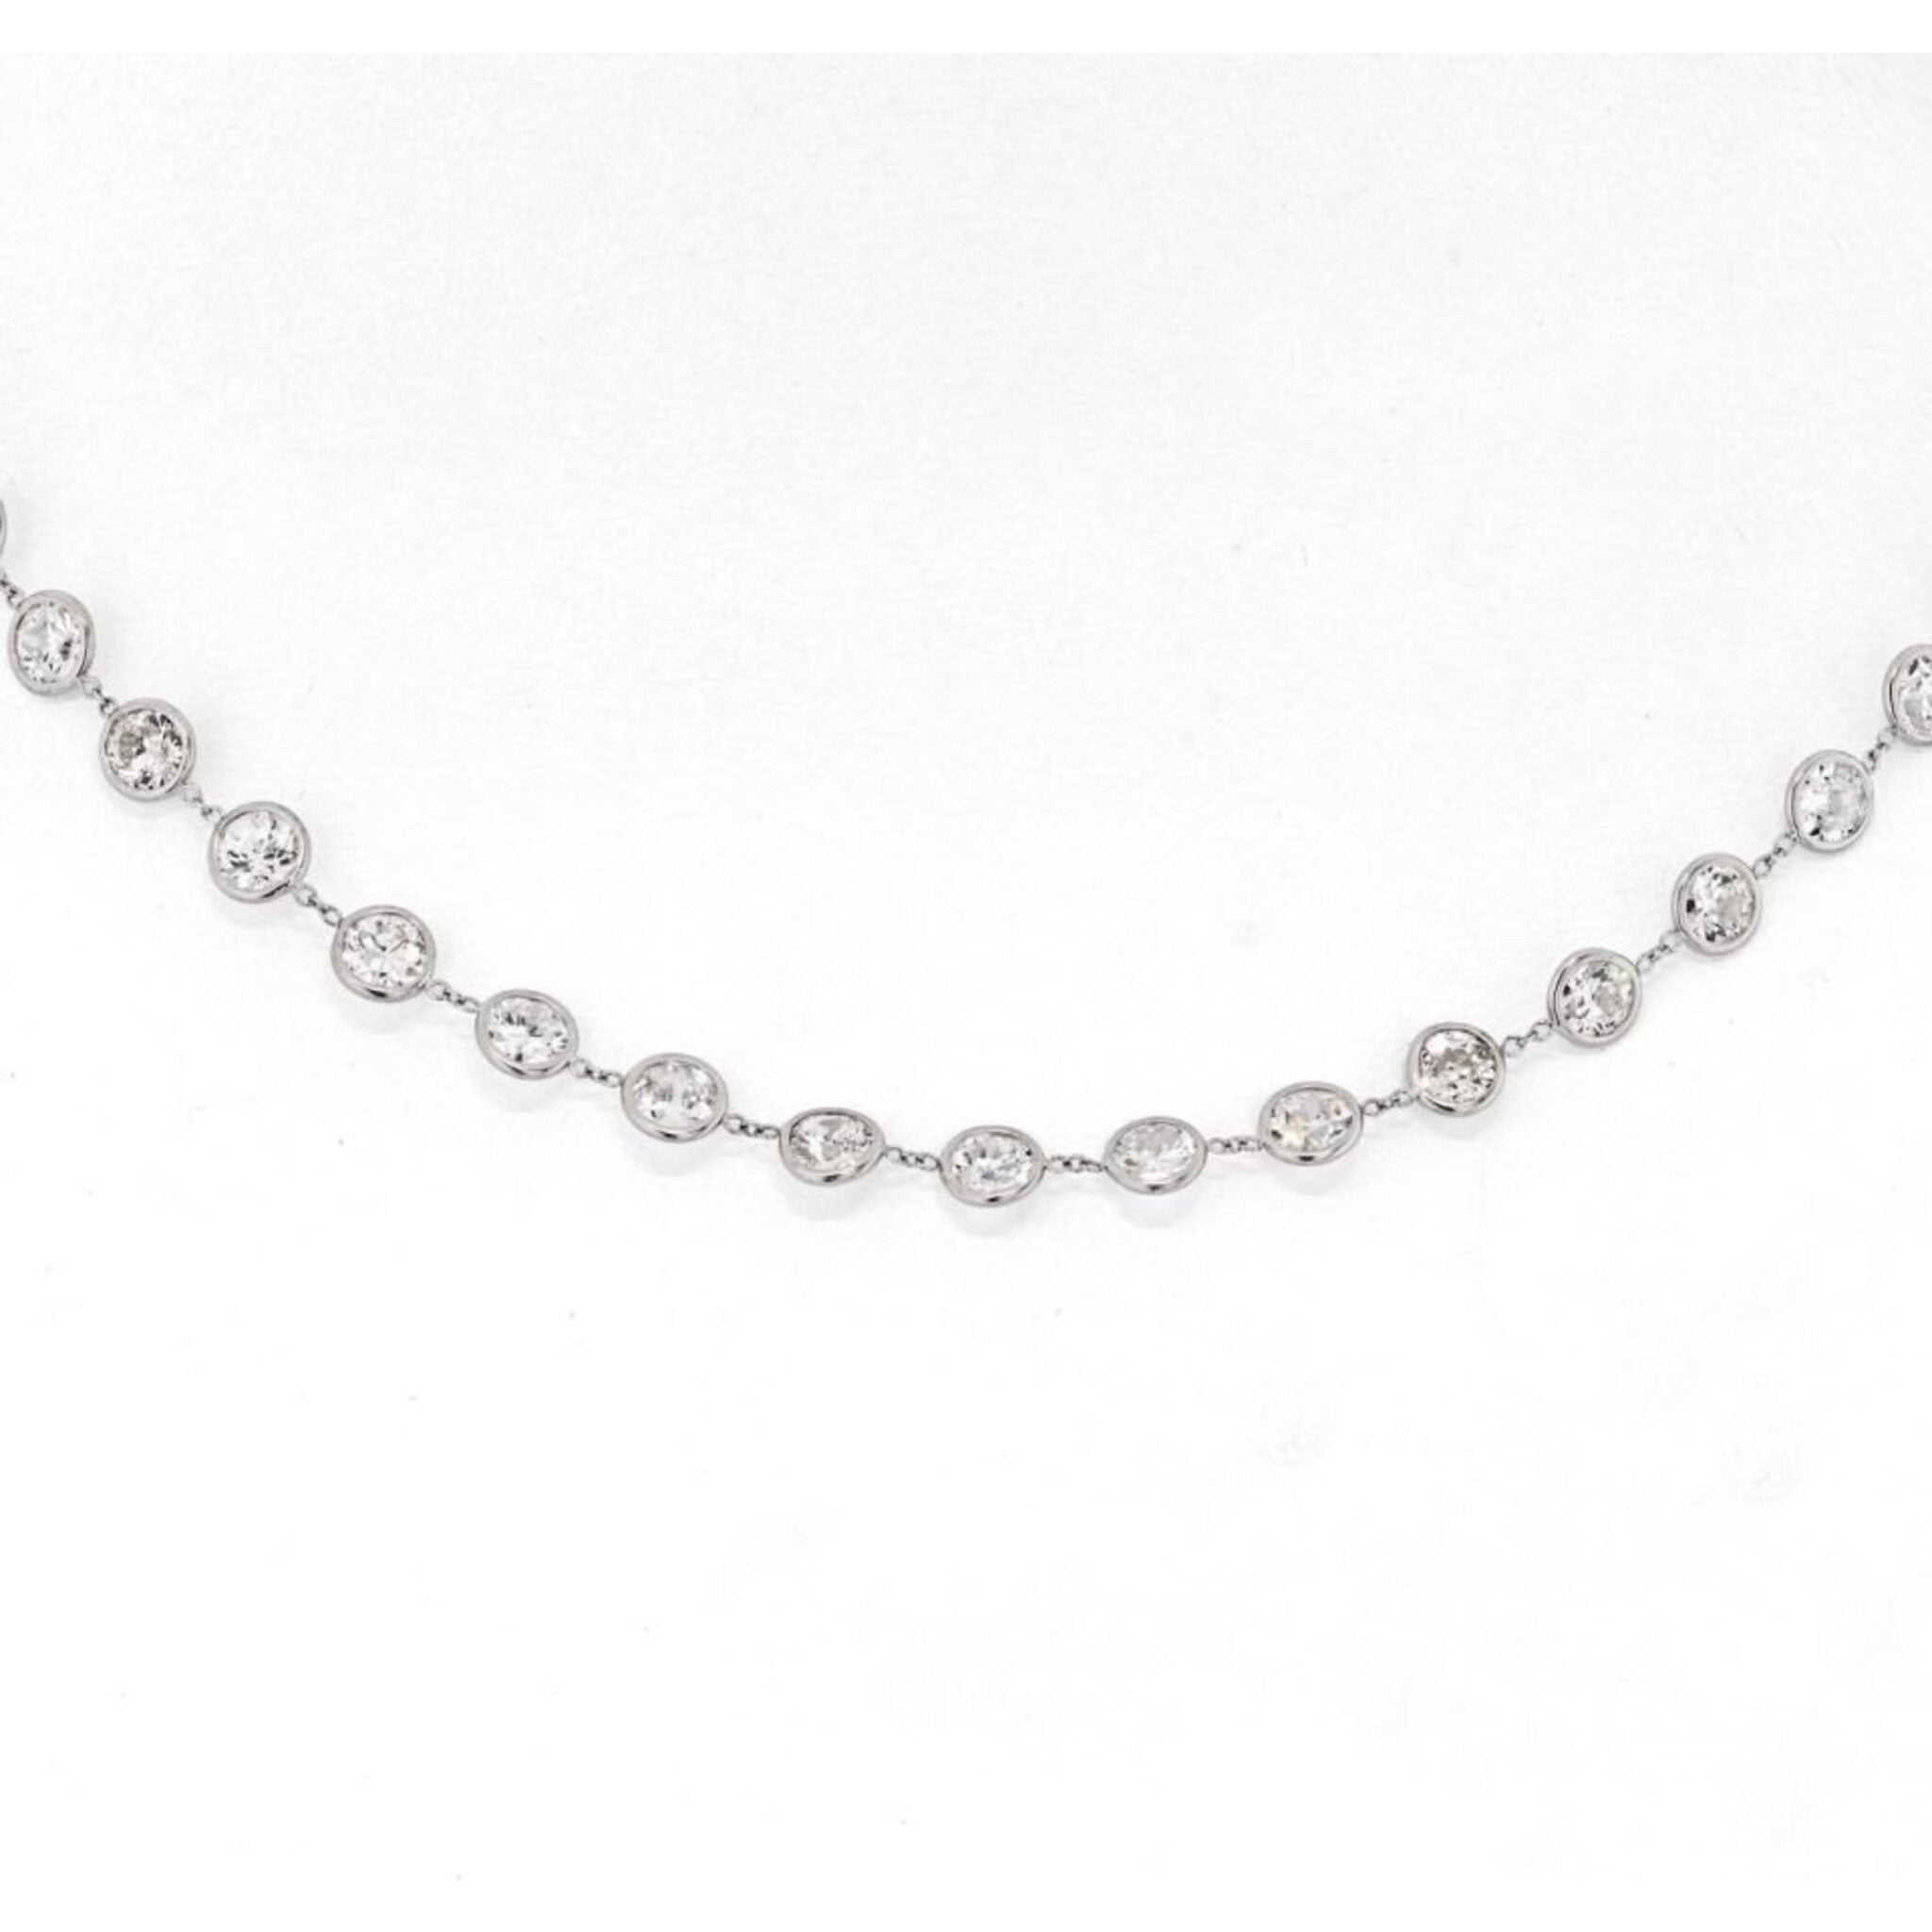 Platinum 15 Old European Cut Diamond By The Yard Chain Necklace